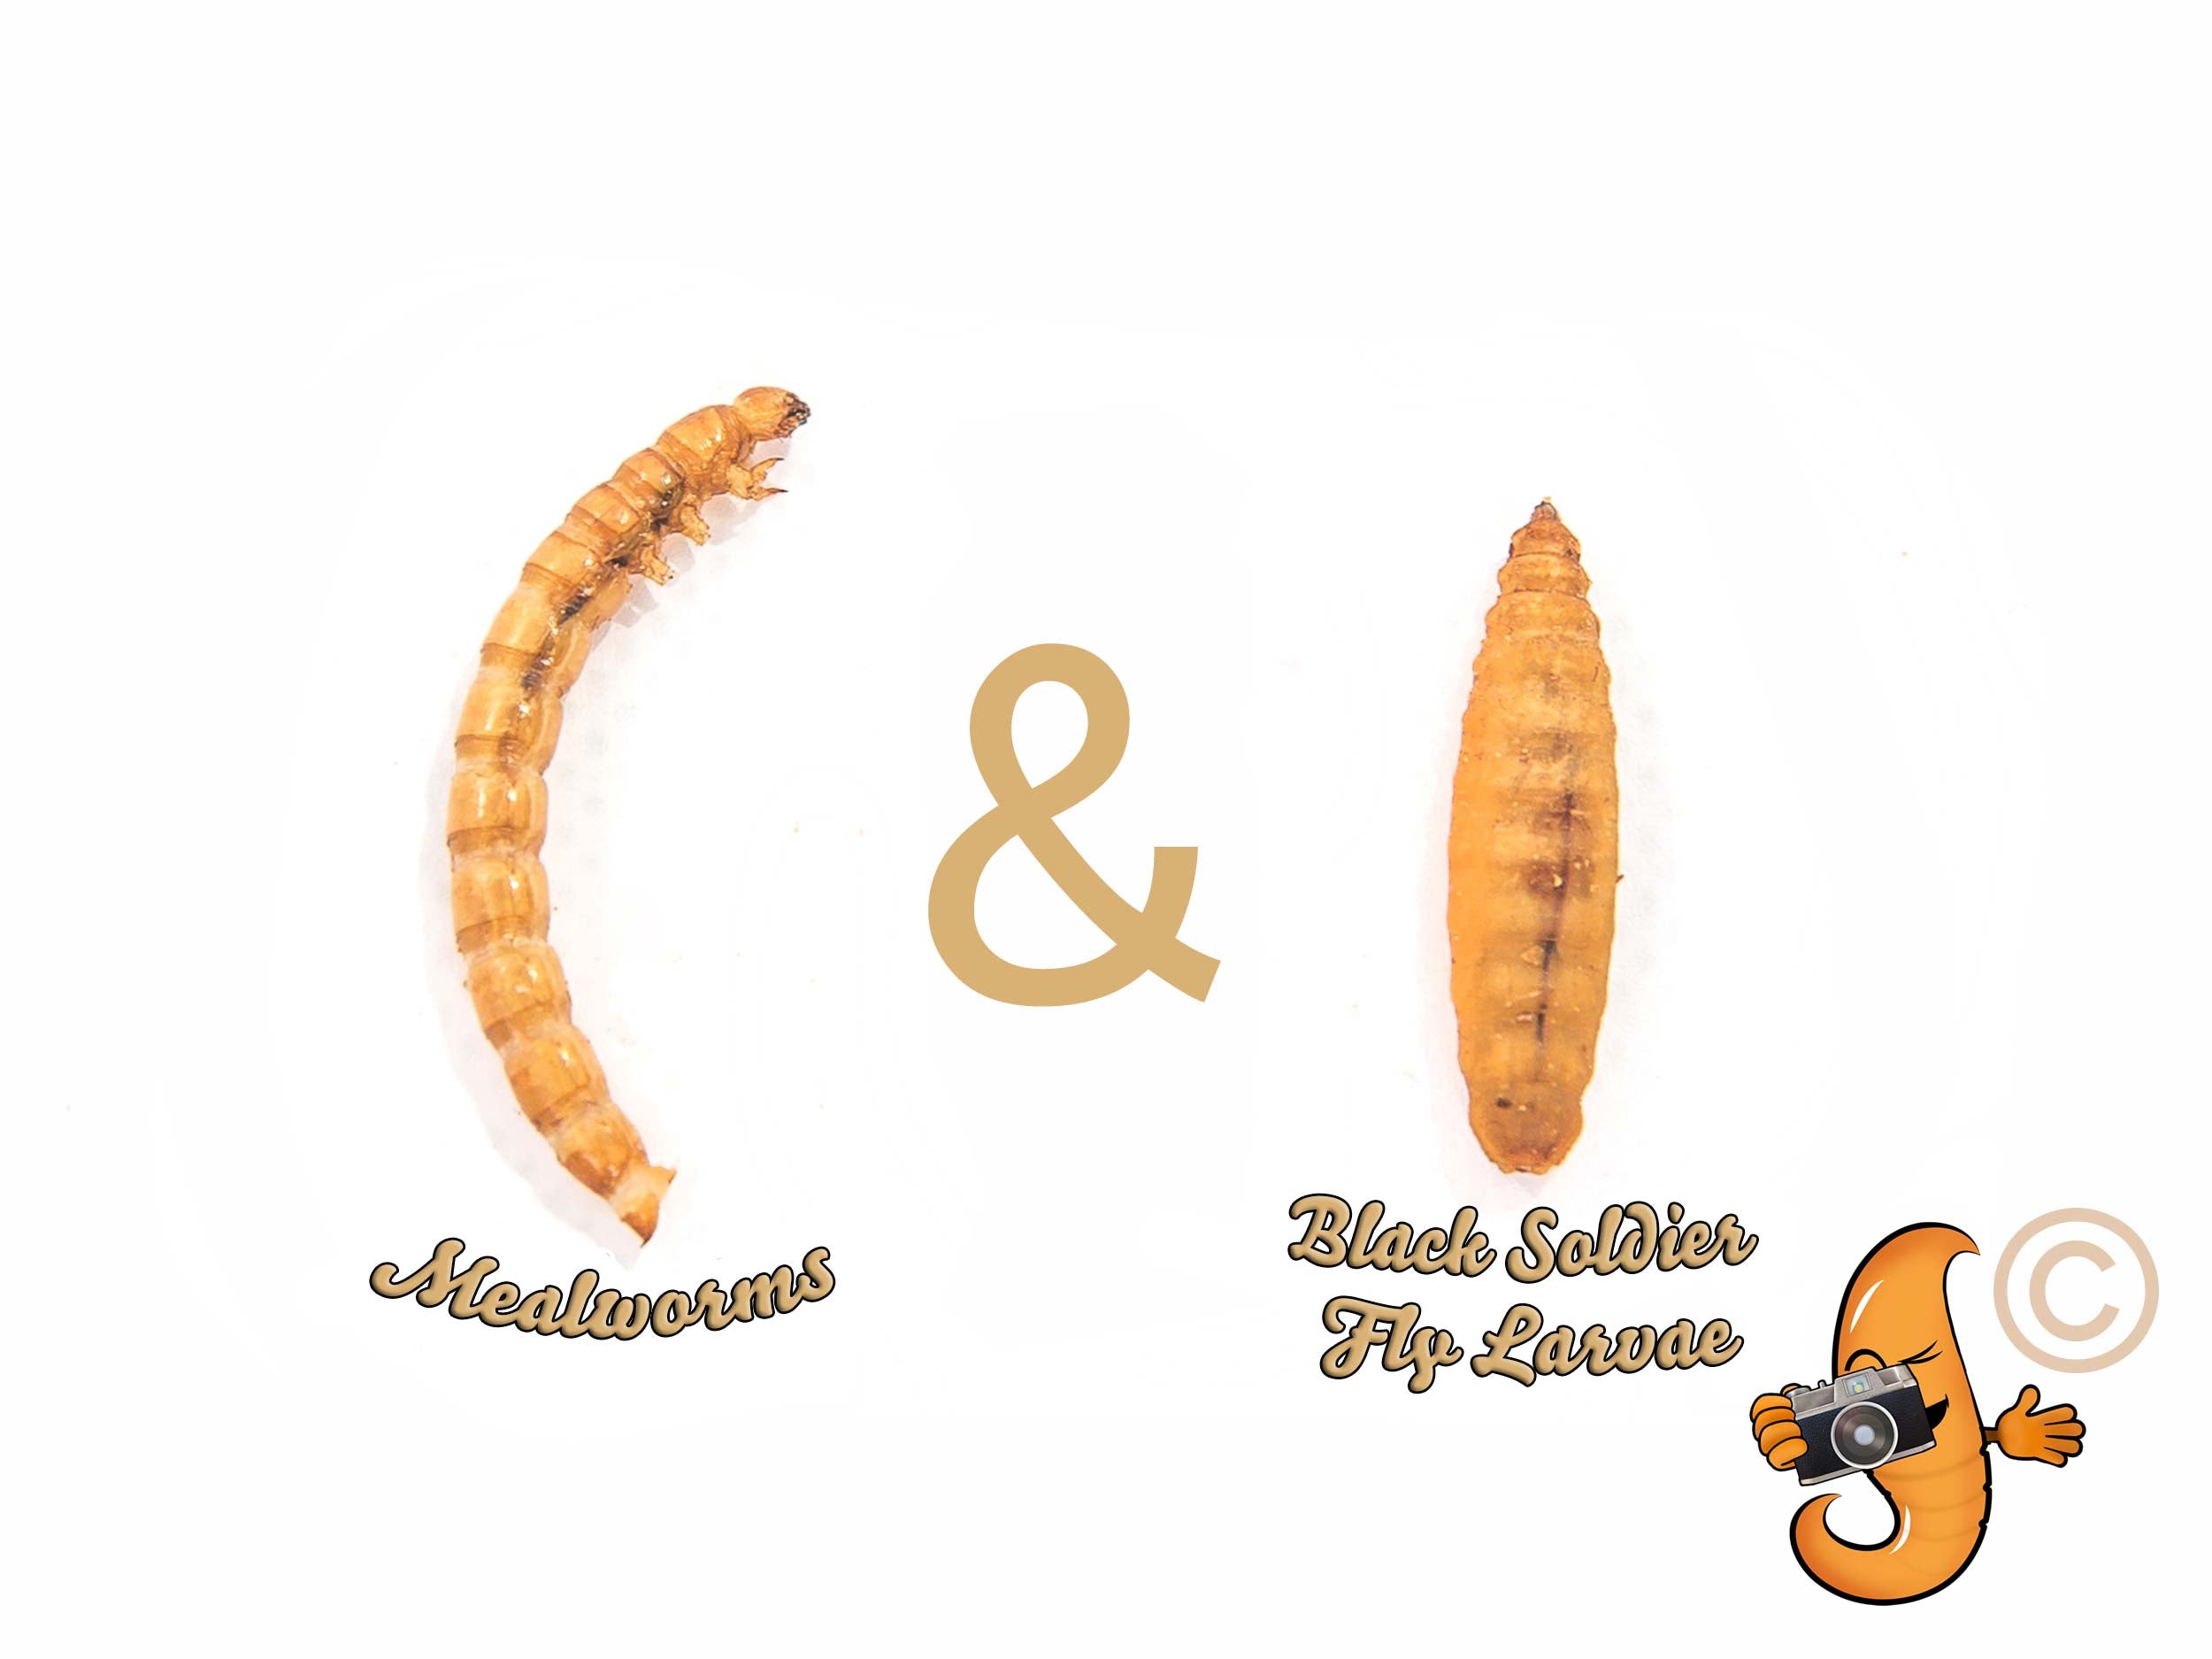 1.82Kg (4lb) Chubby Mix (Mealworm & Black Soldier Fly Larvae)